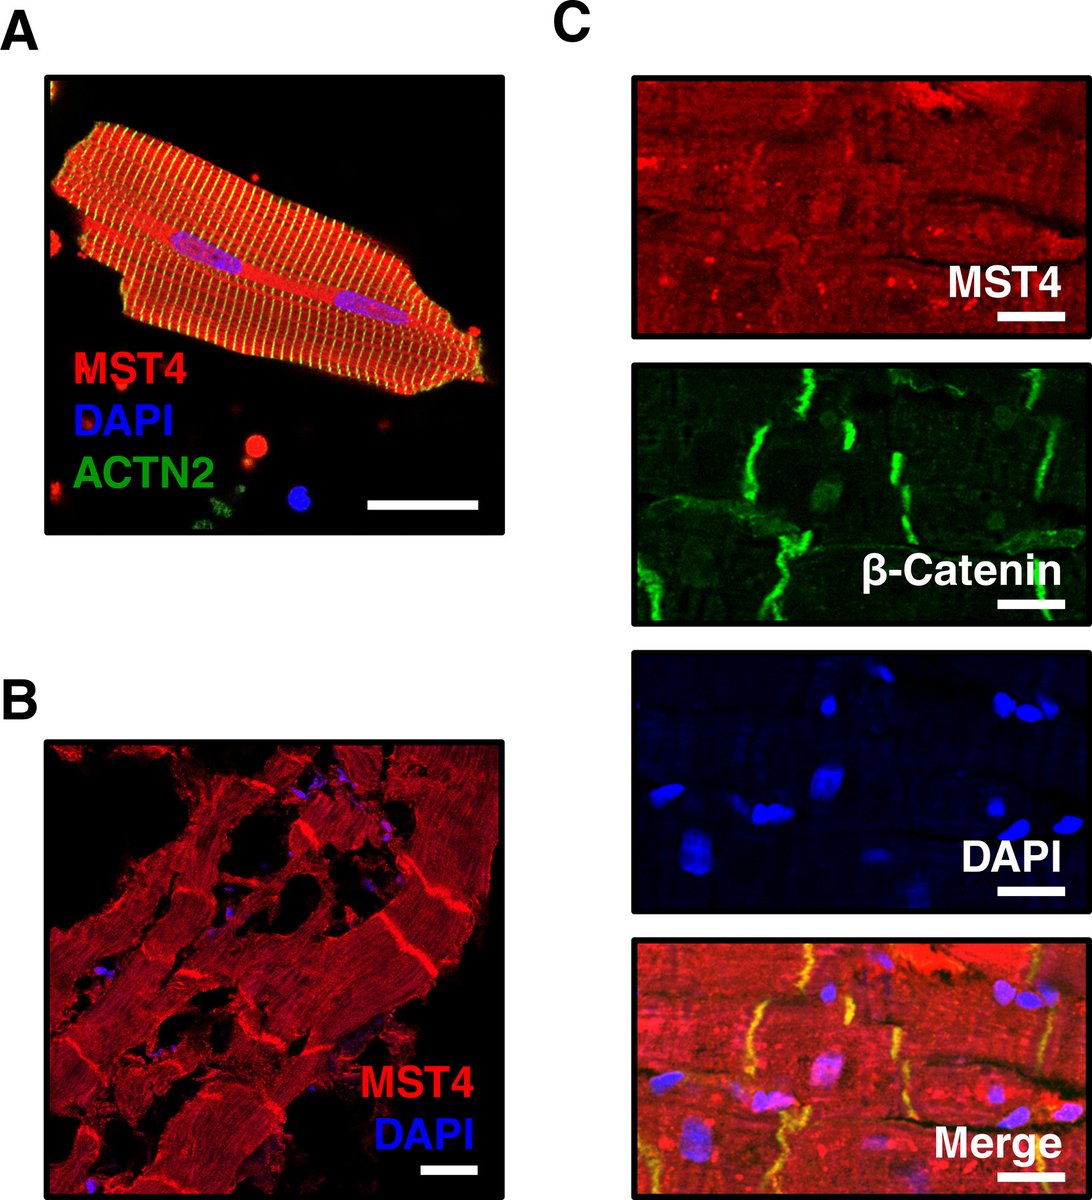 New in JBC press: 'Researchers identified Mst4 as a novel cardiac kinase that is upregulated in human cardiomyopathy and regulates cardiomyocyte growth and survival.' Learn more: jbc.org/article/S0021-…